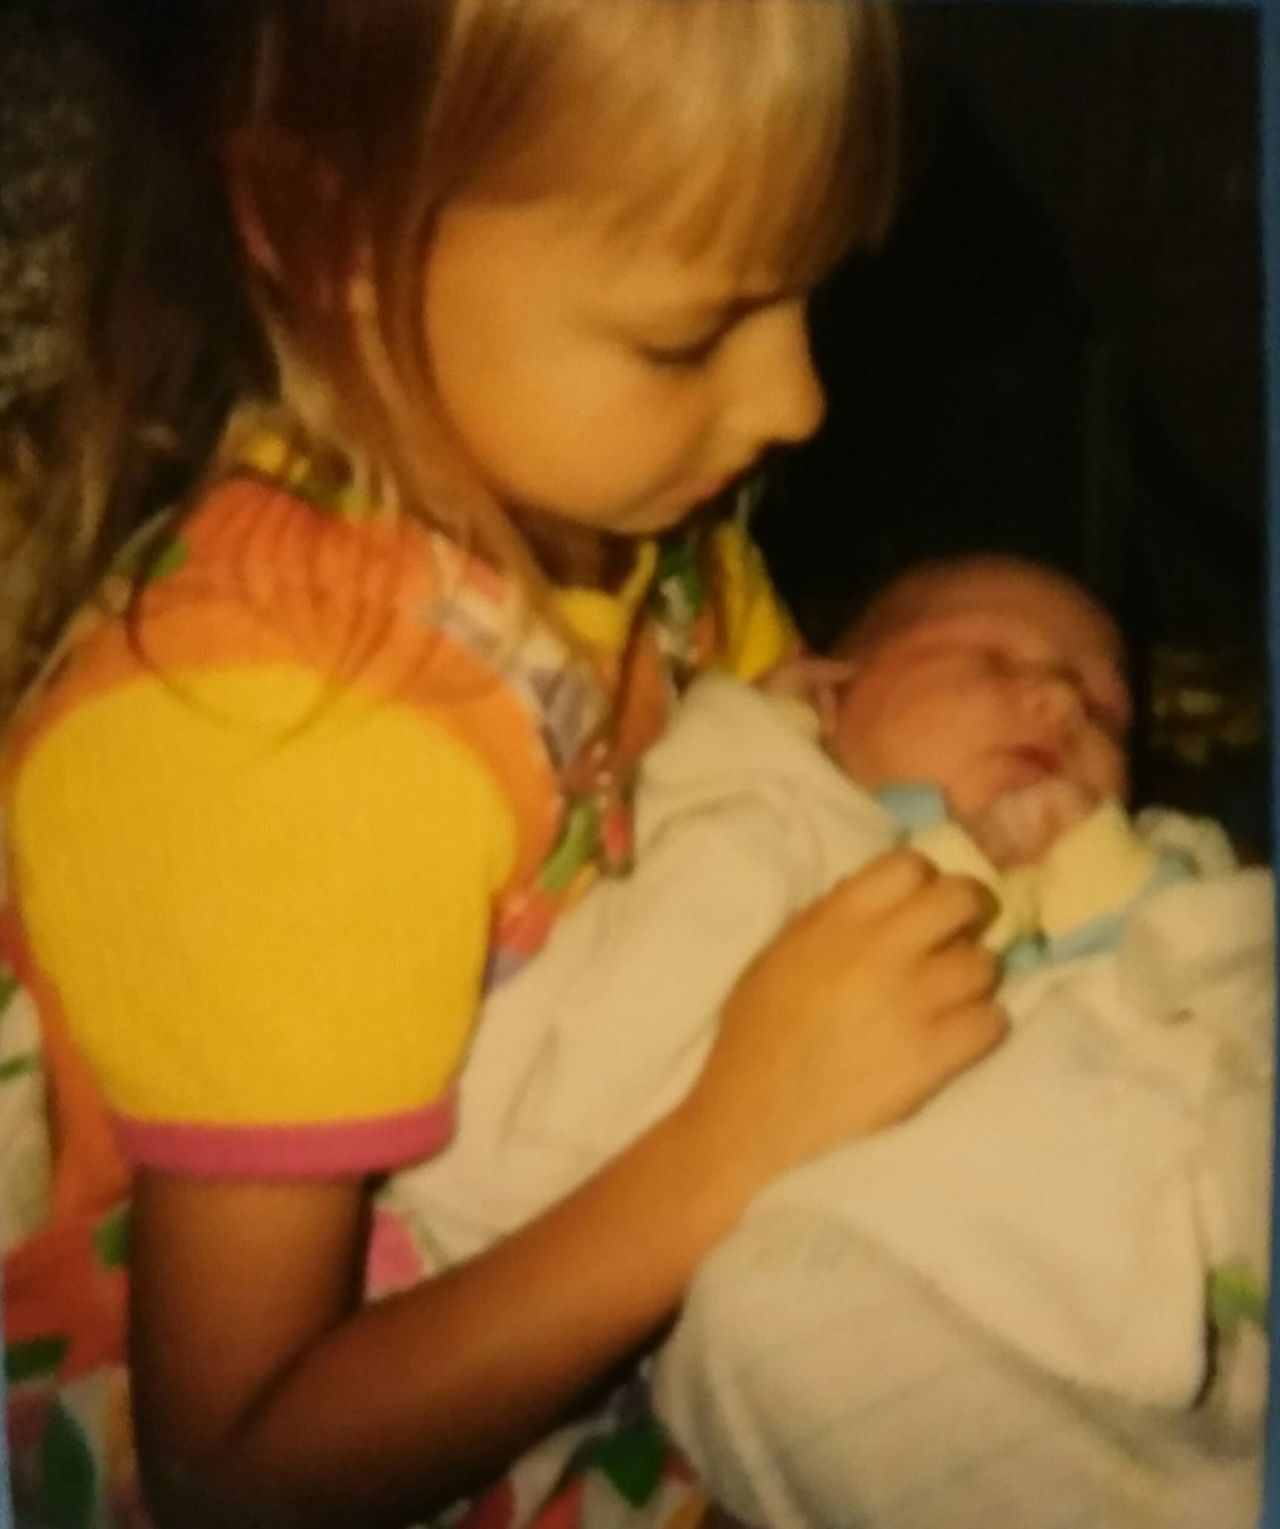 The author, age 5, holding baby No. 6, Micah, after a home birth in Kent, Minnesota, in 1997.